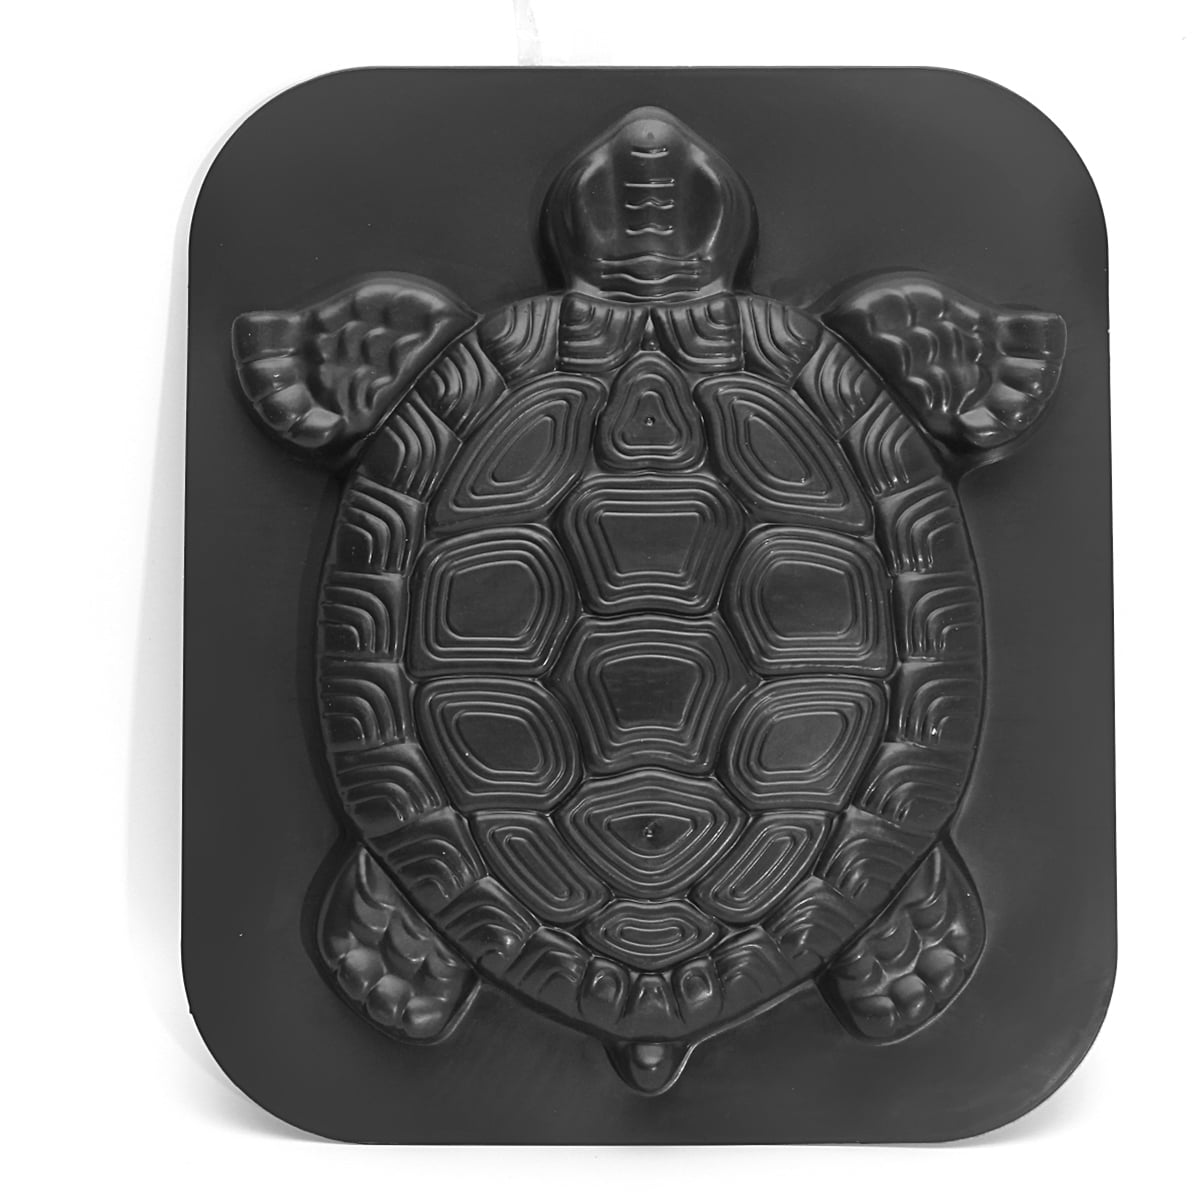 plastic turtle stepping stone mold  13" x 11" x 1.5" 080 abs mould 